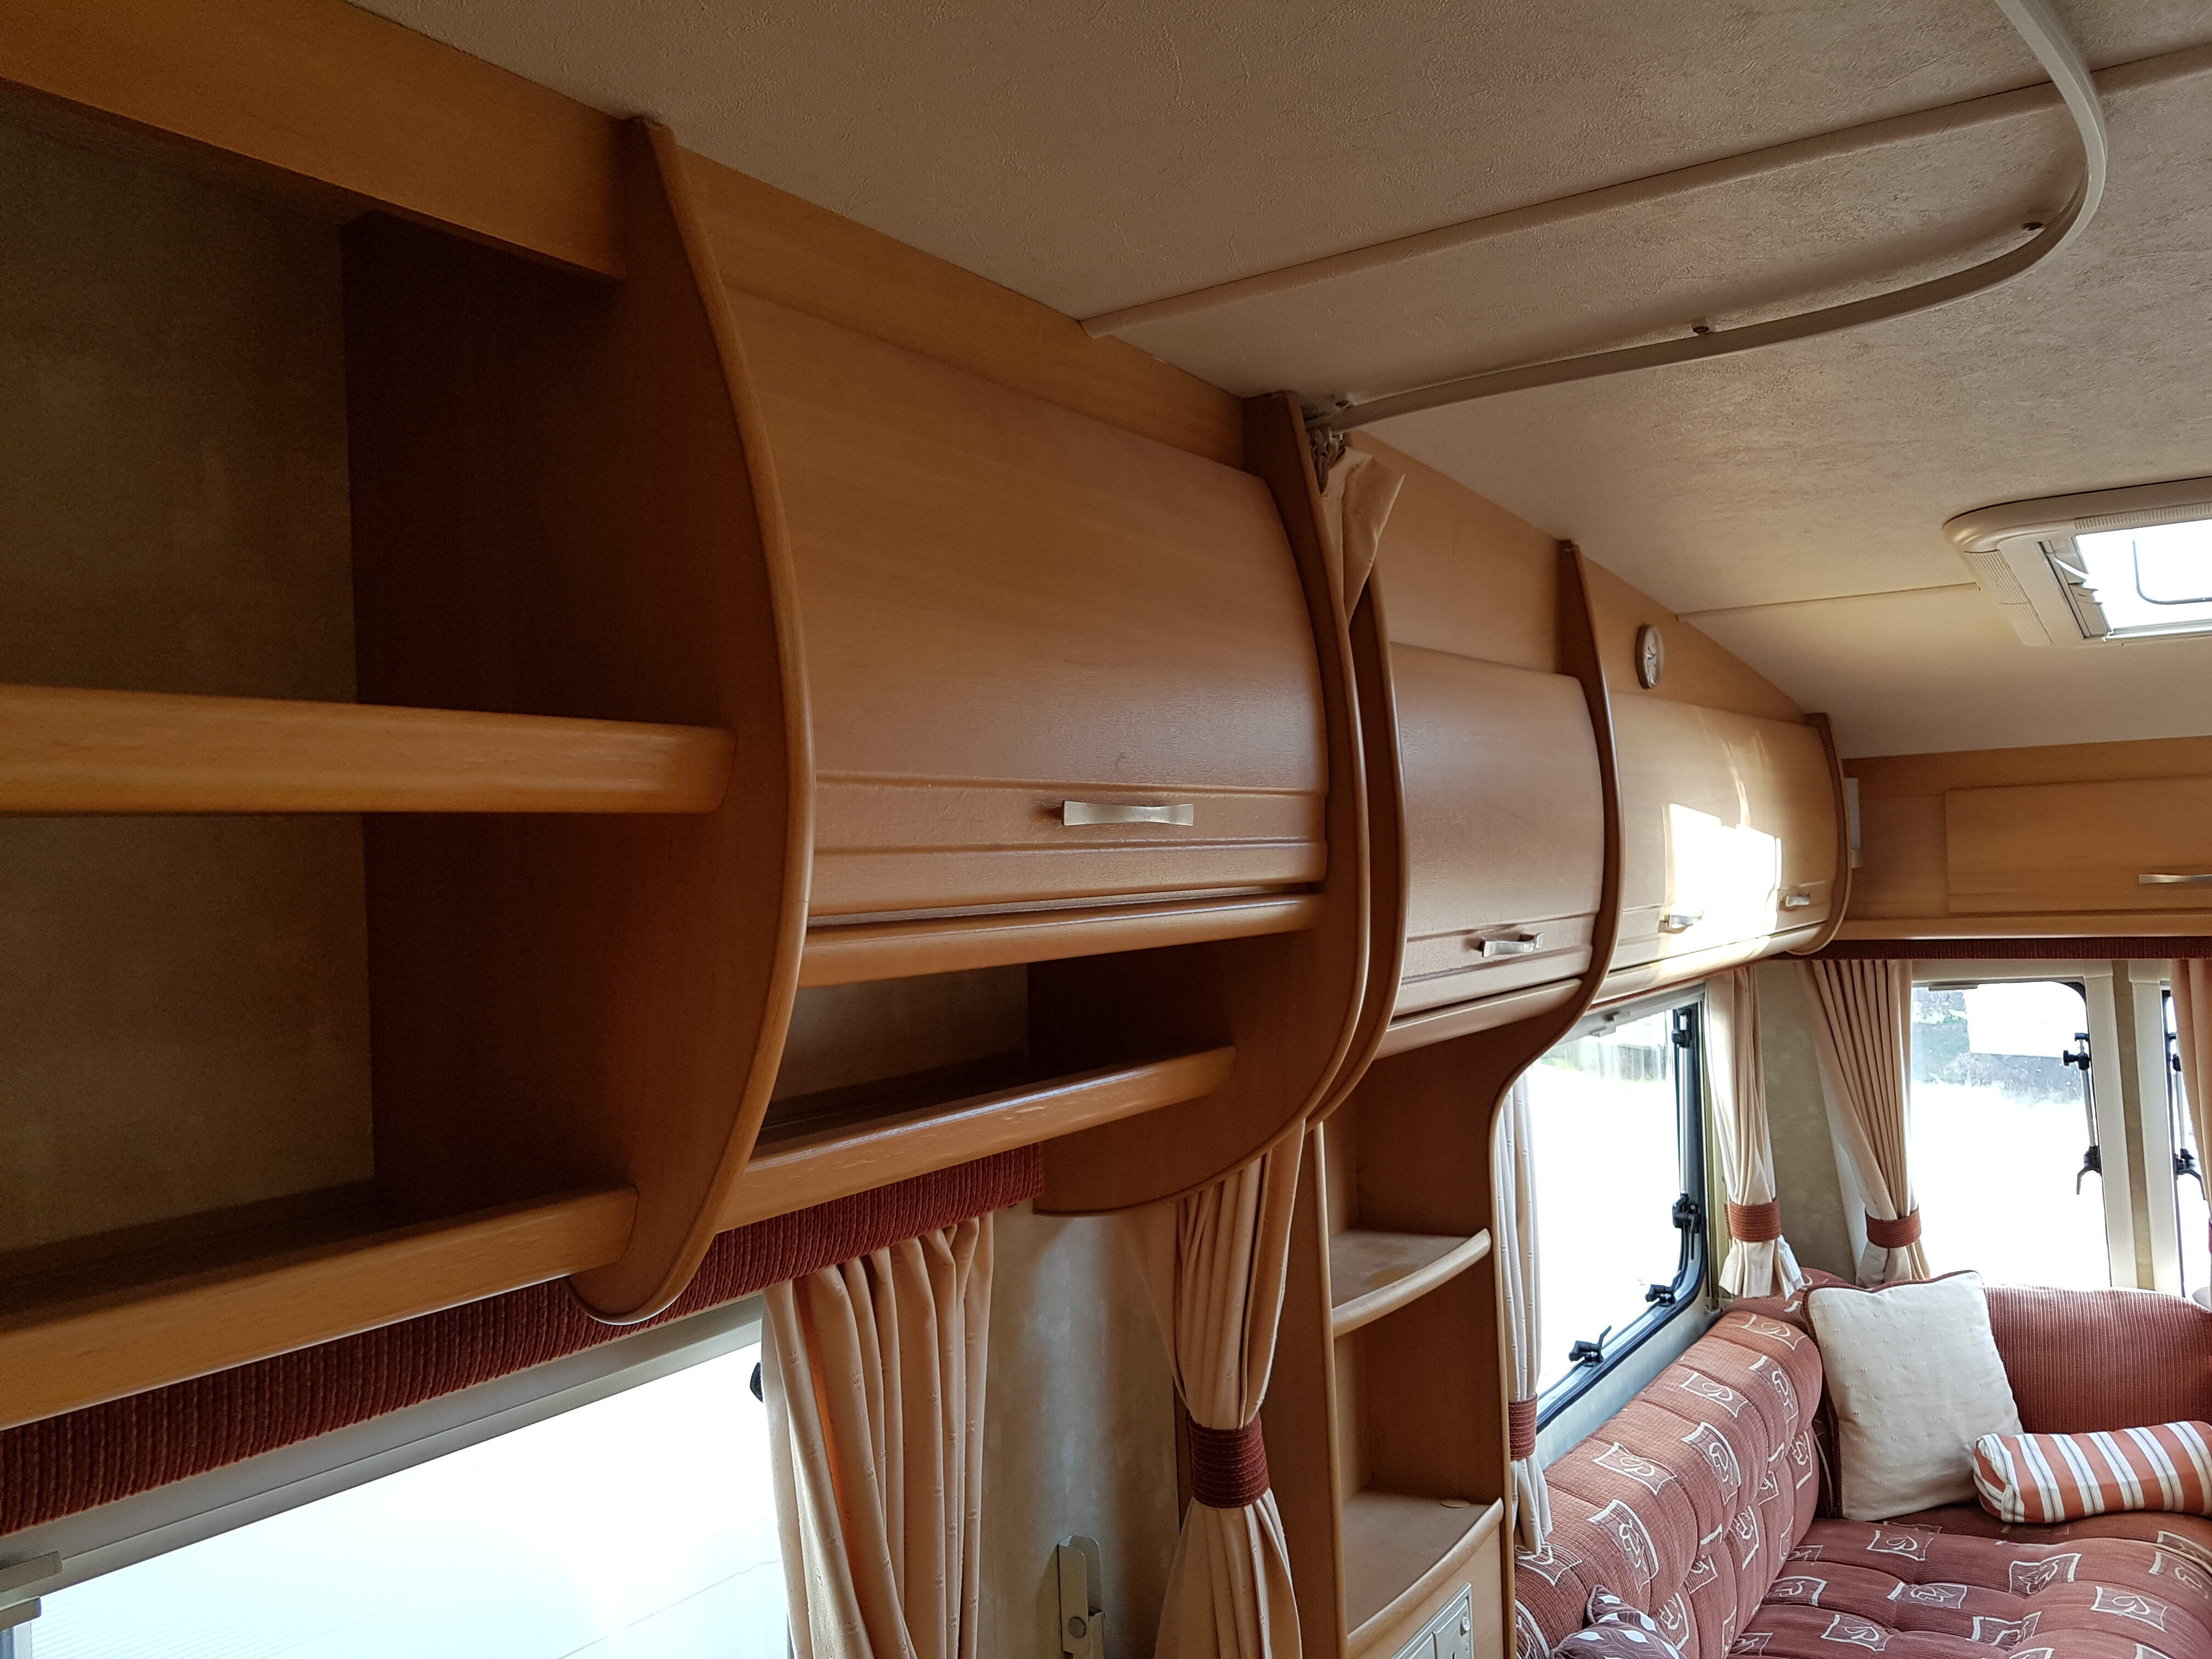 NOW SOLD 2003 Swift Charisma 570 6 Berth Fixed Bunks Side Dinette Caravan